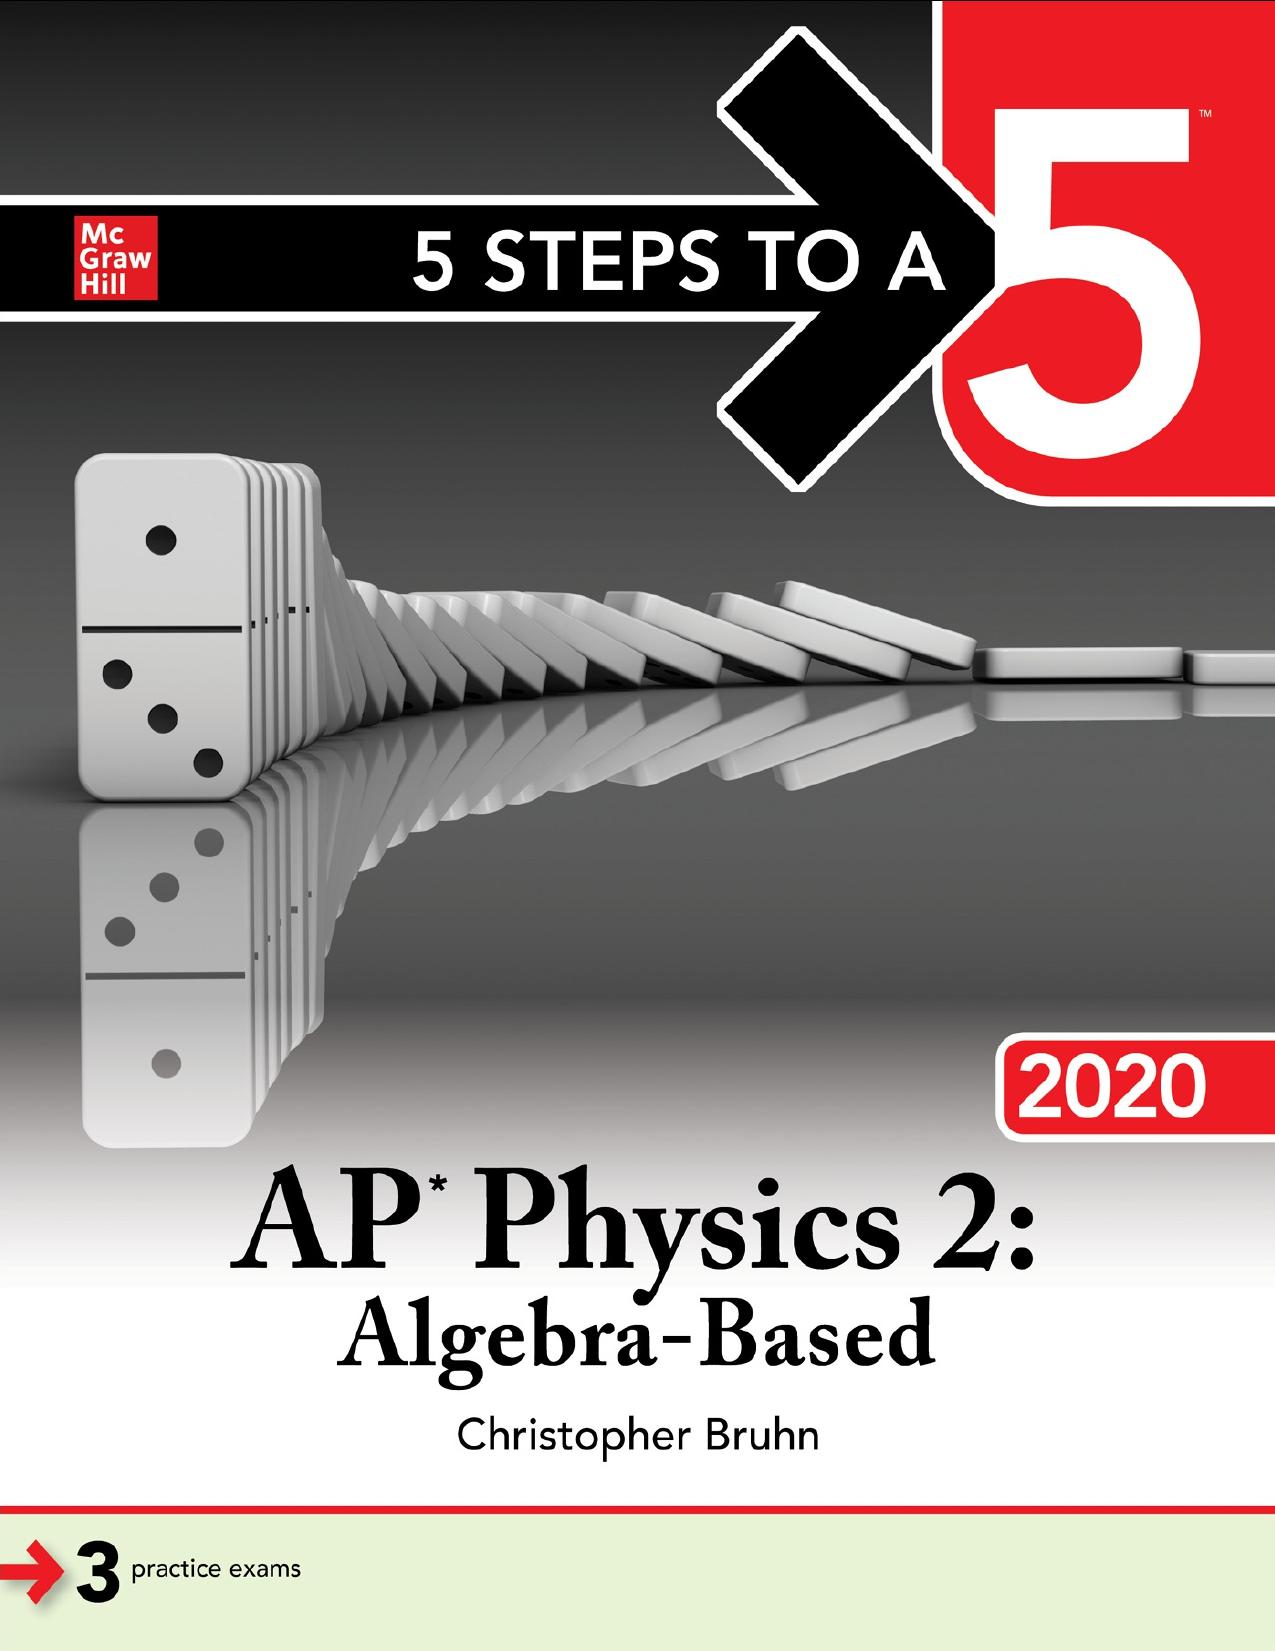 5 Steps to a 5 AP Physics 2 Algebra-Based 2020 1th by Christopher Bruhn.jpg